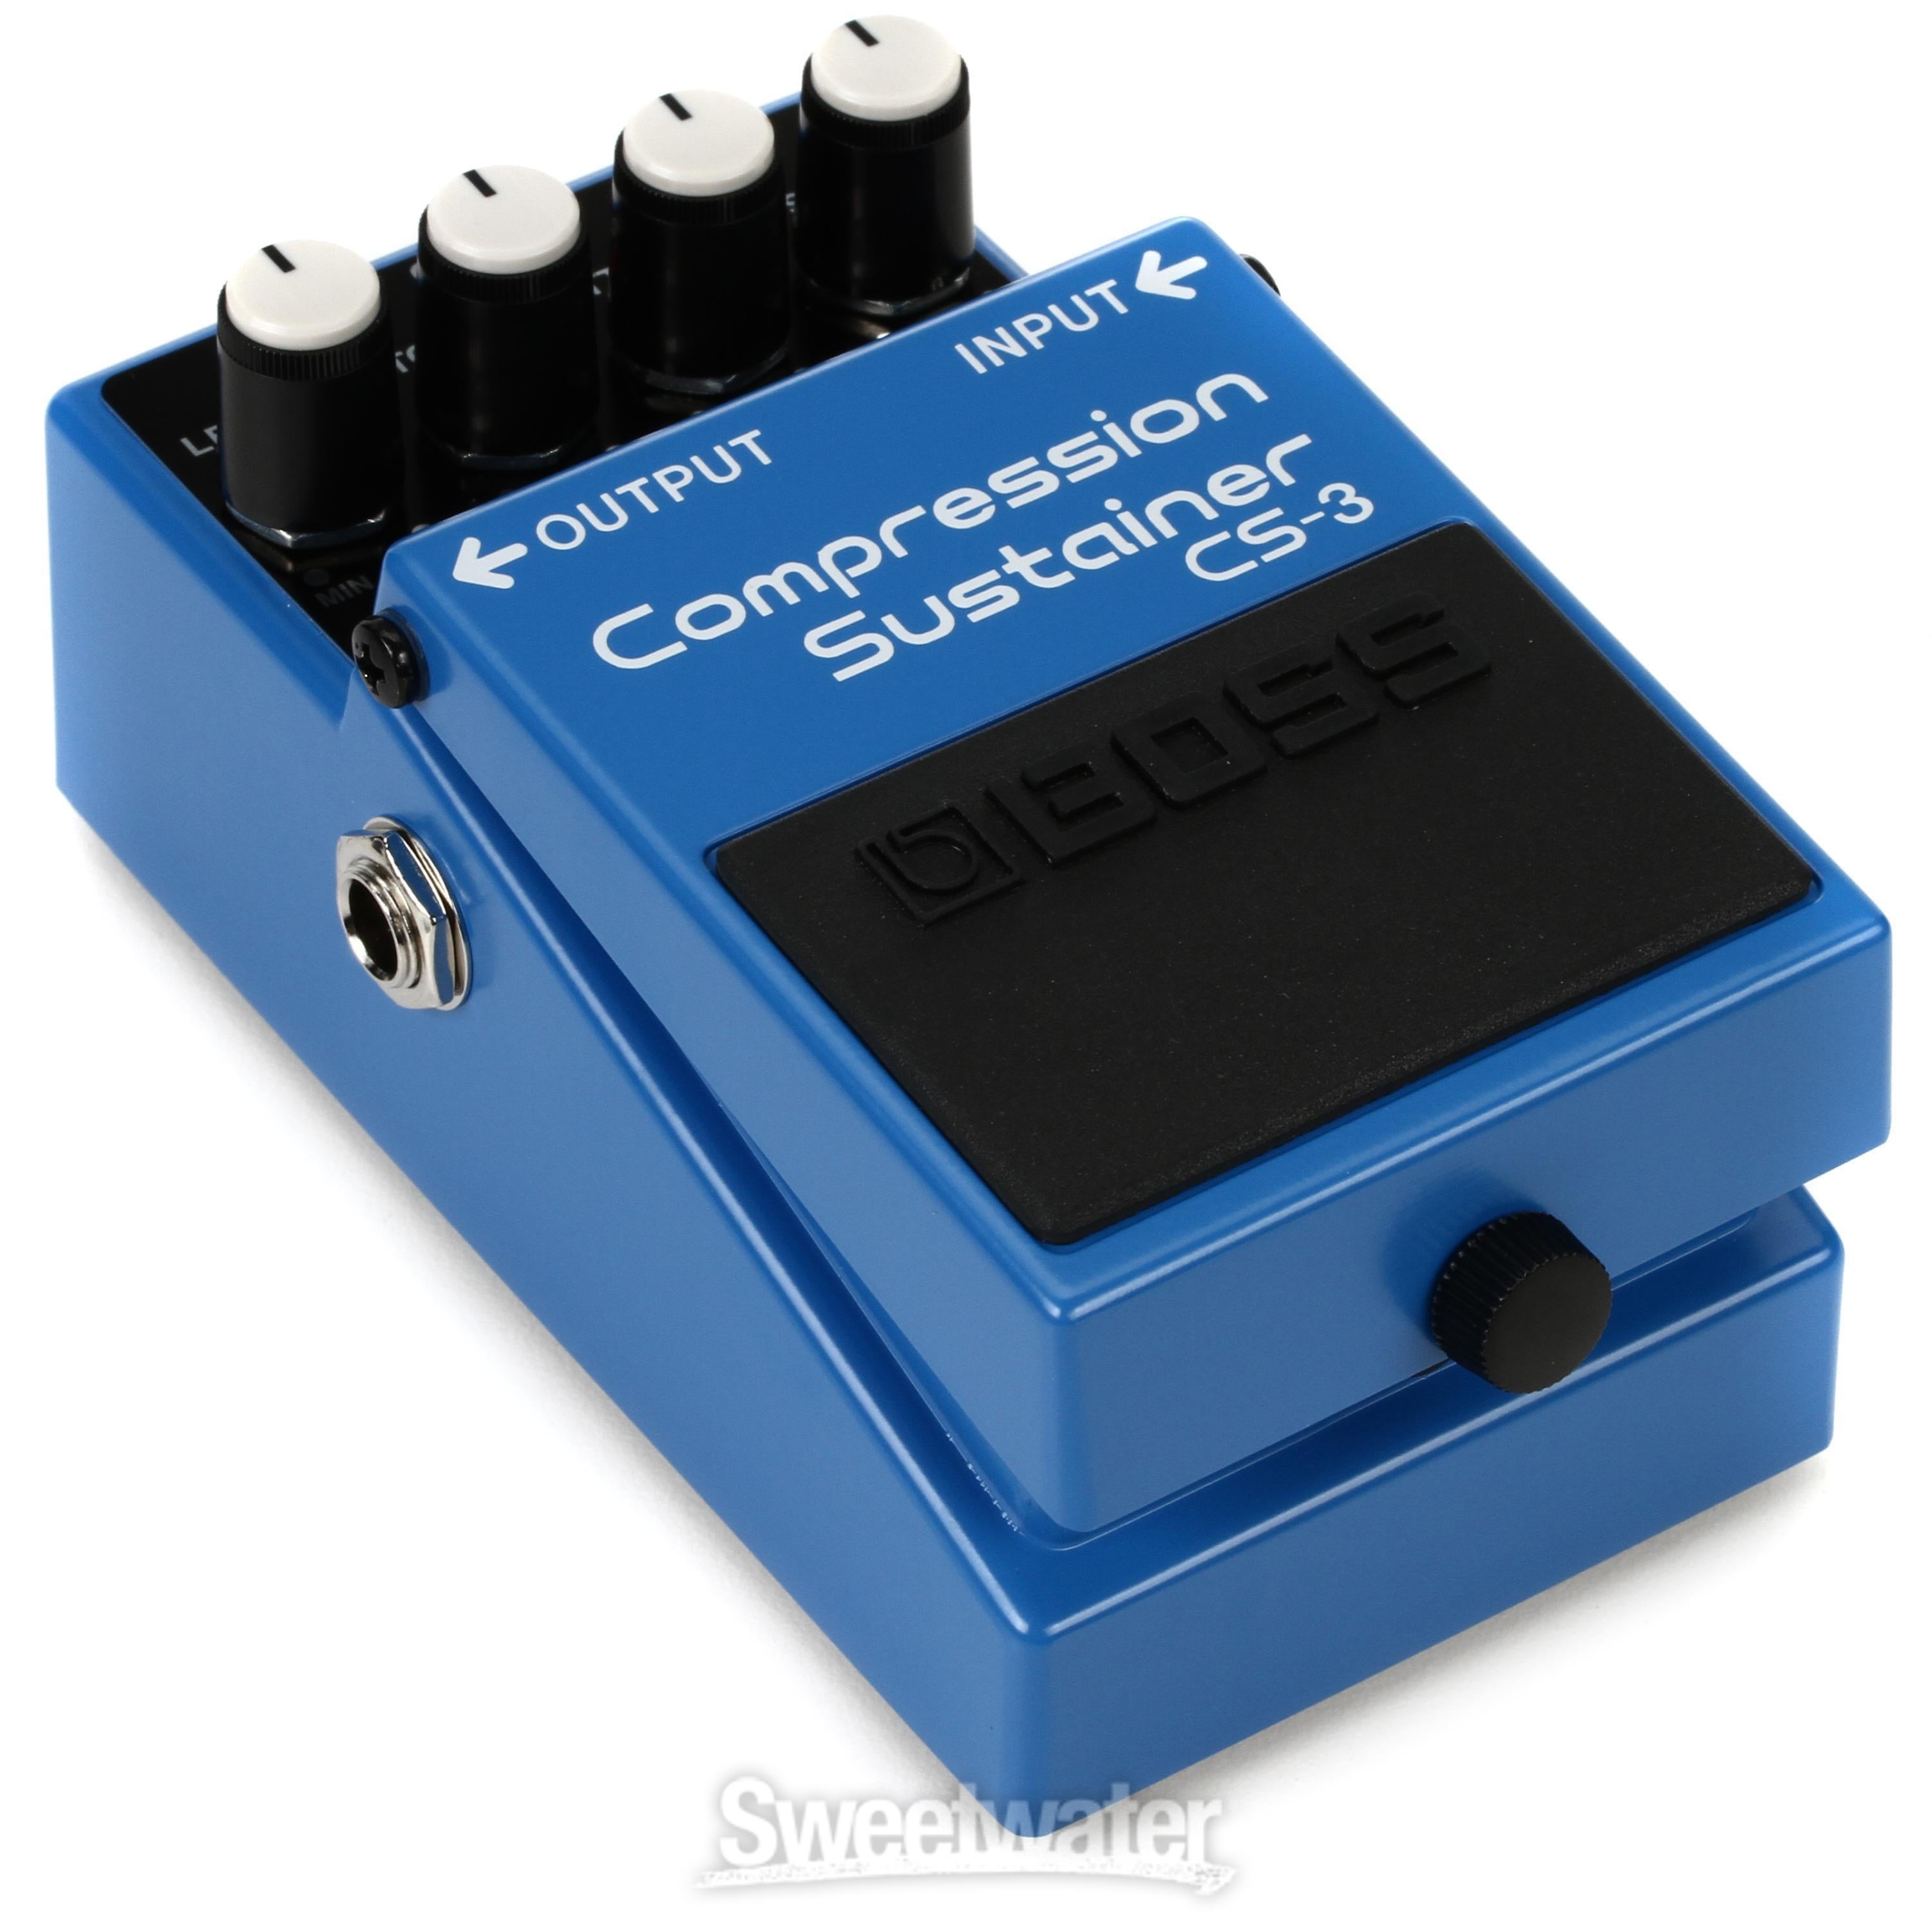 Boss CS-3 Compression Sustainer Pedal | Sweetwater